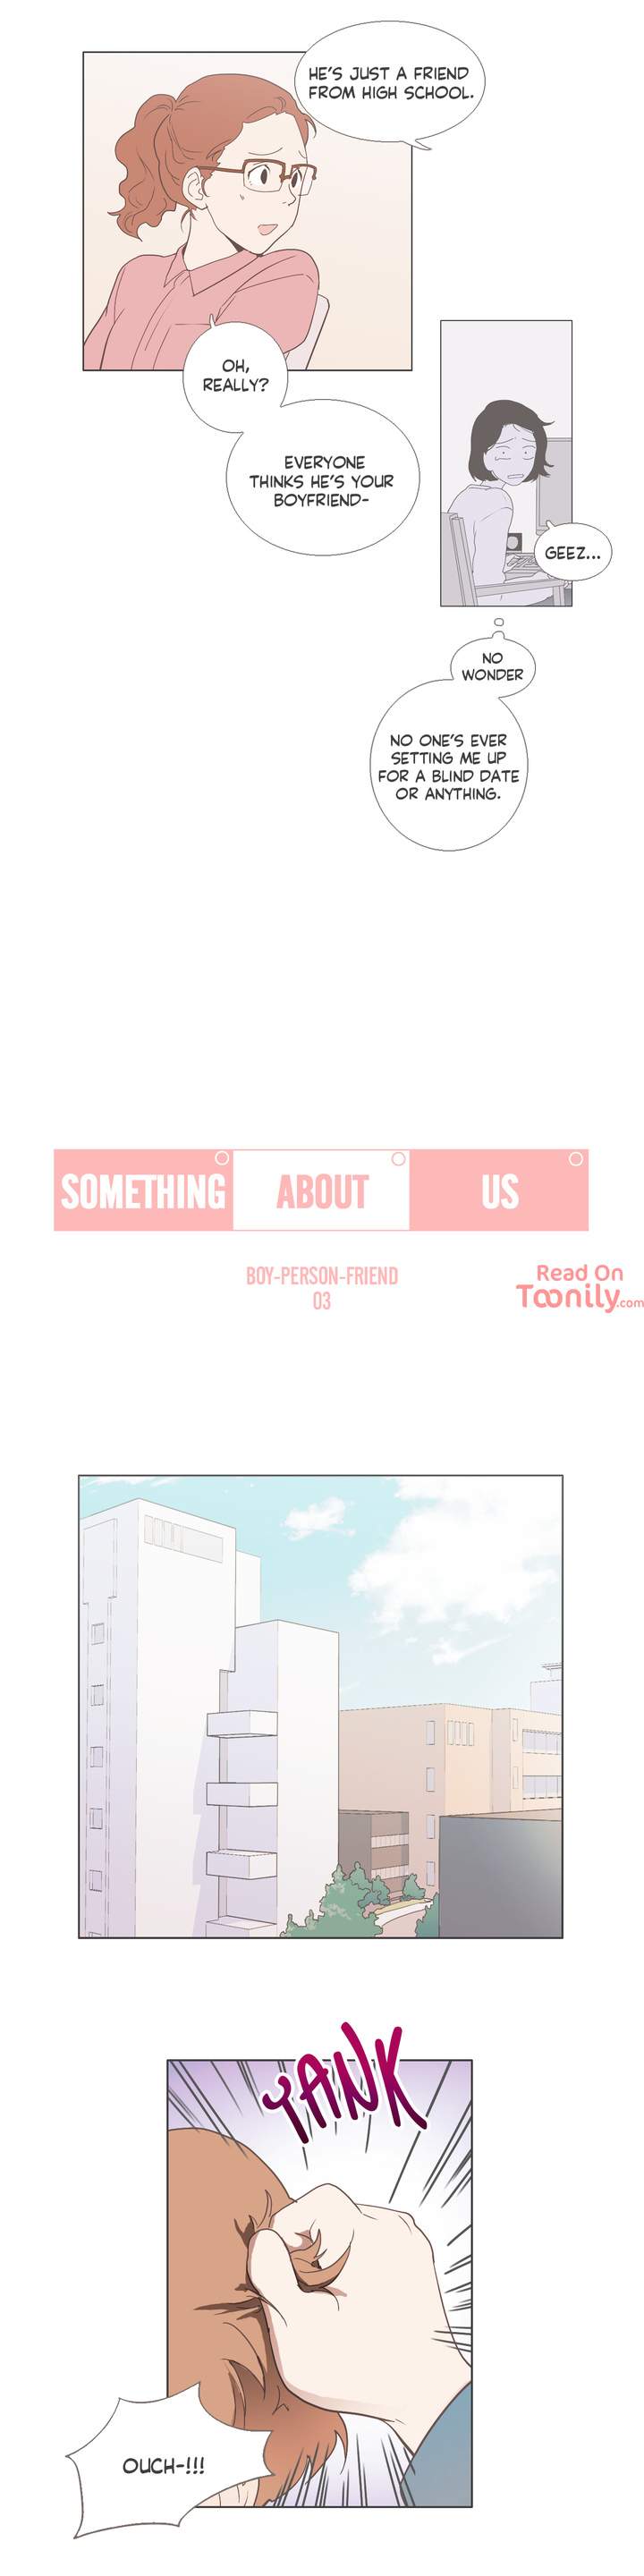 Something About Us - Chapter 3 Page 2